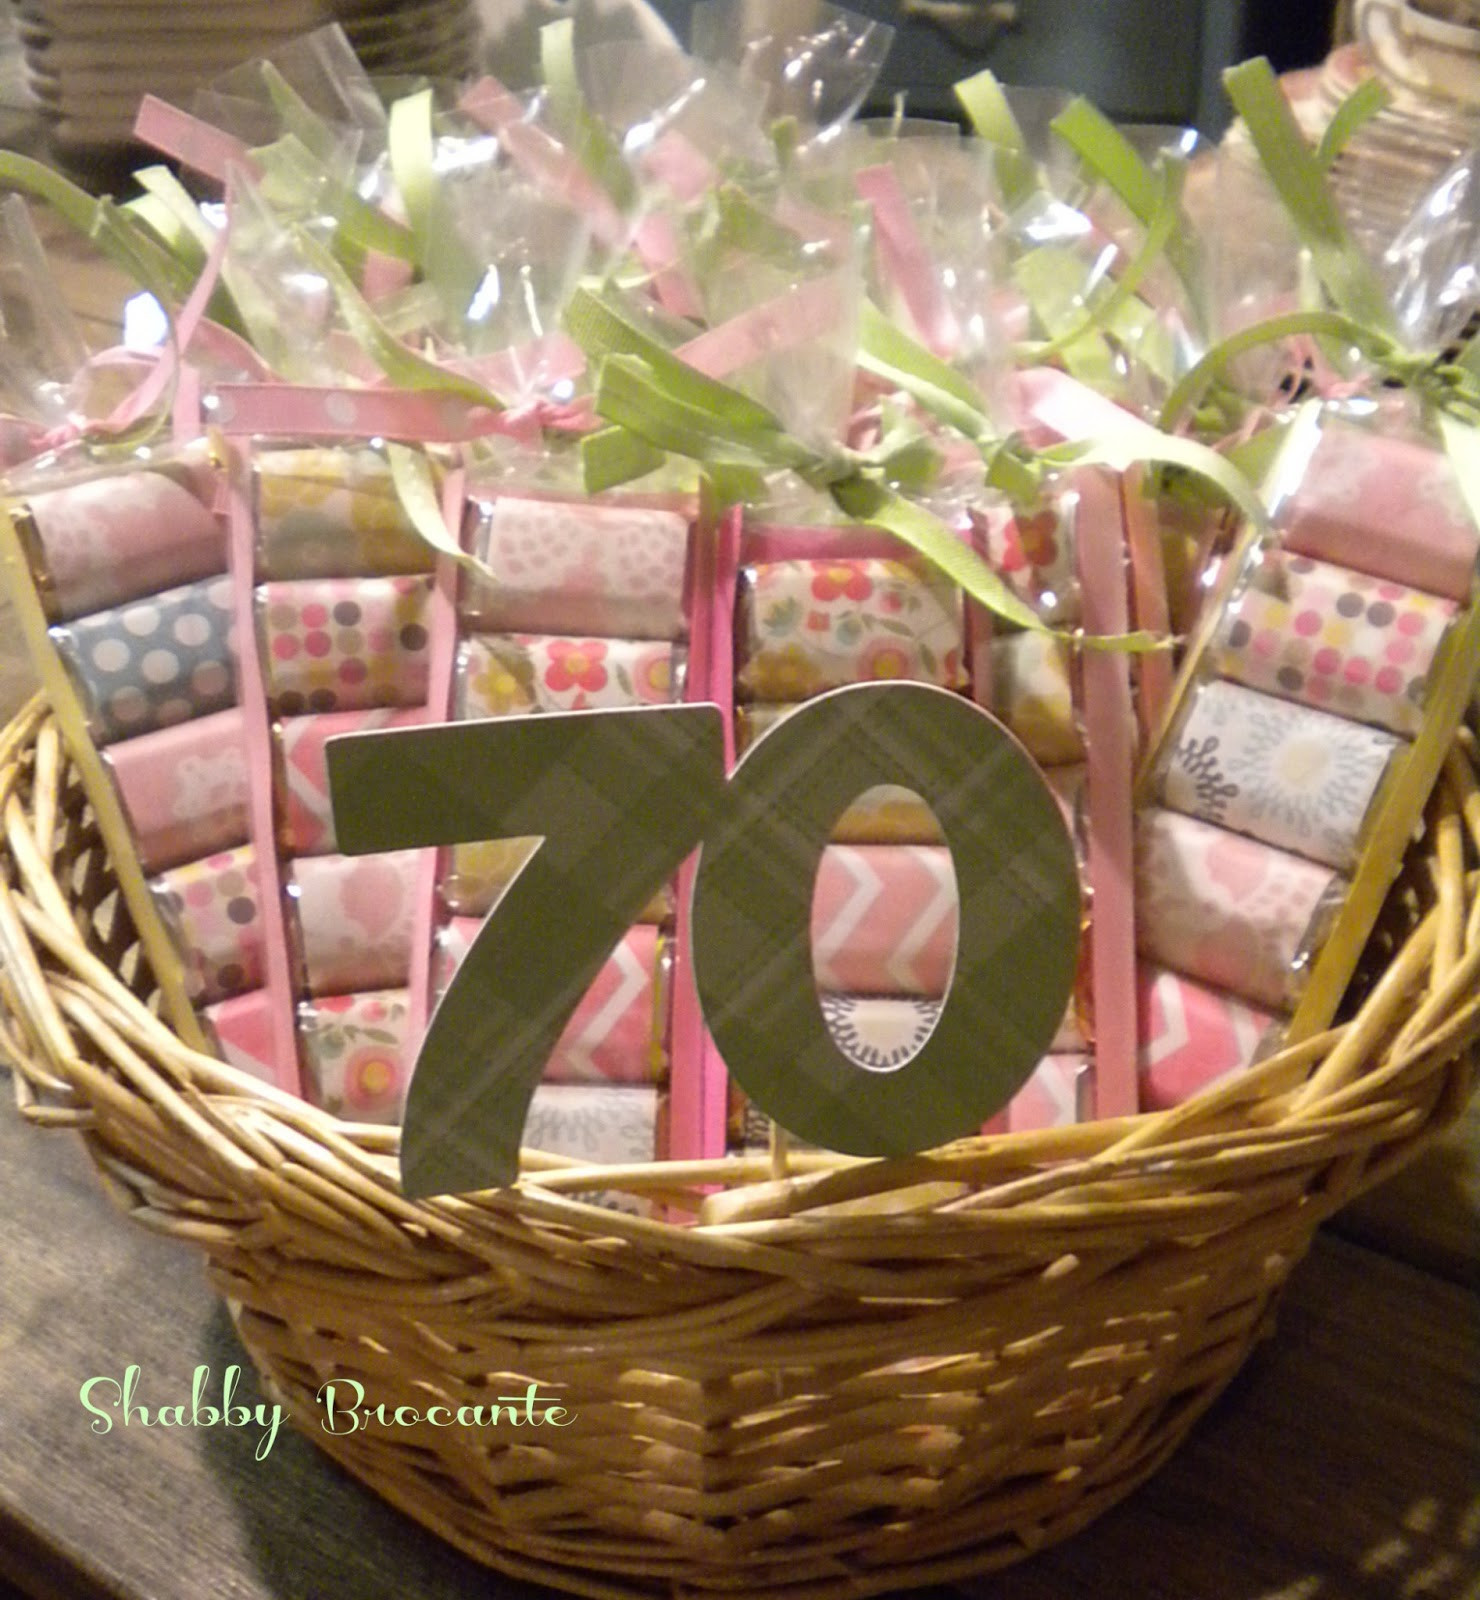 Party Gifts For Adults
 Shabby Brocante Hersey s Adult Party Favors